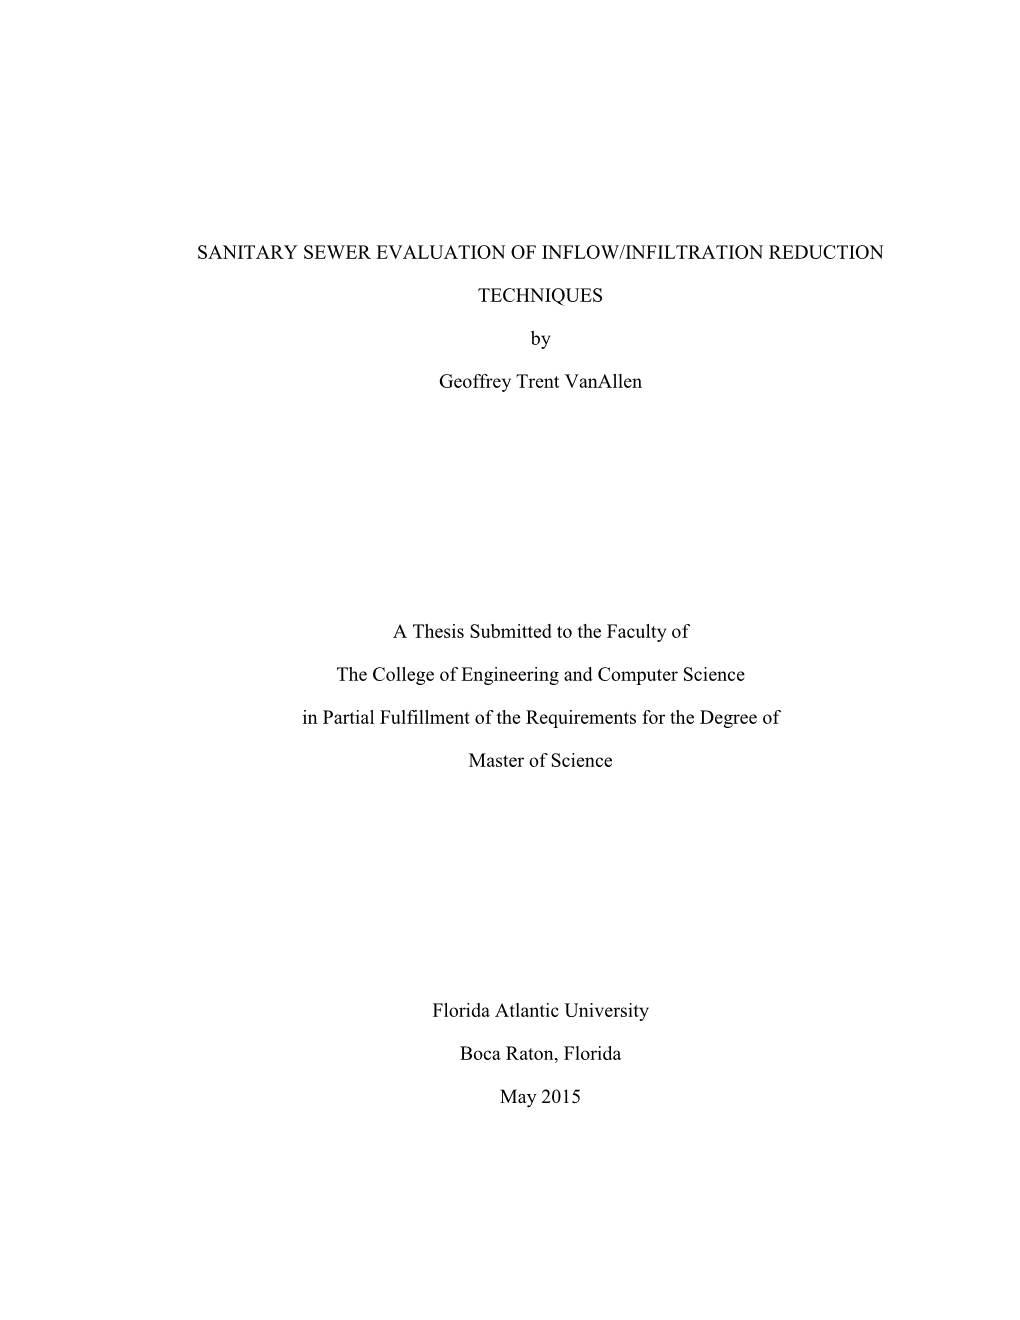 SANITARY SEWER EVALUATION of INFLOW/INFILTRATION REDUCTION TECHNIQUES by Geoffrey Trent Vanallen a Thesis Submitted to the Facul